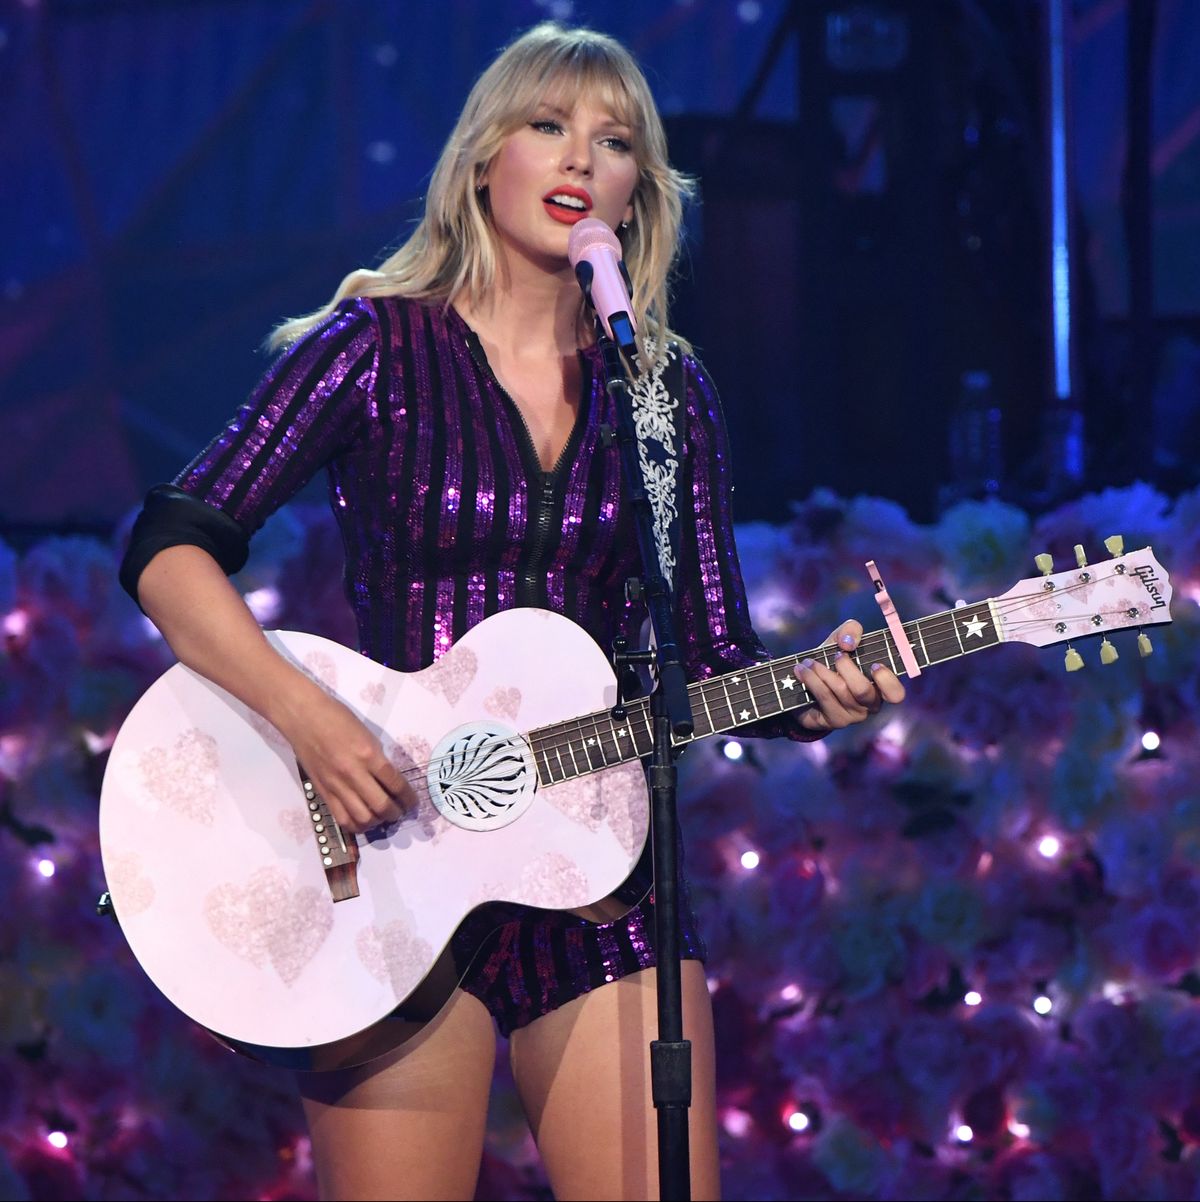 Taylor Swift, Dua Lipa, SZA And Becky G Perform at The Prime Day Concert, Presented by Amazon Music